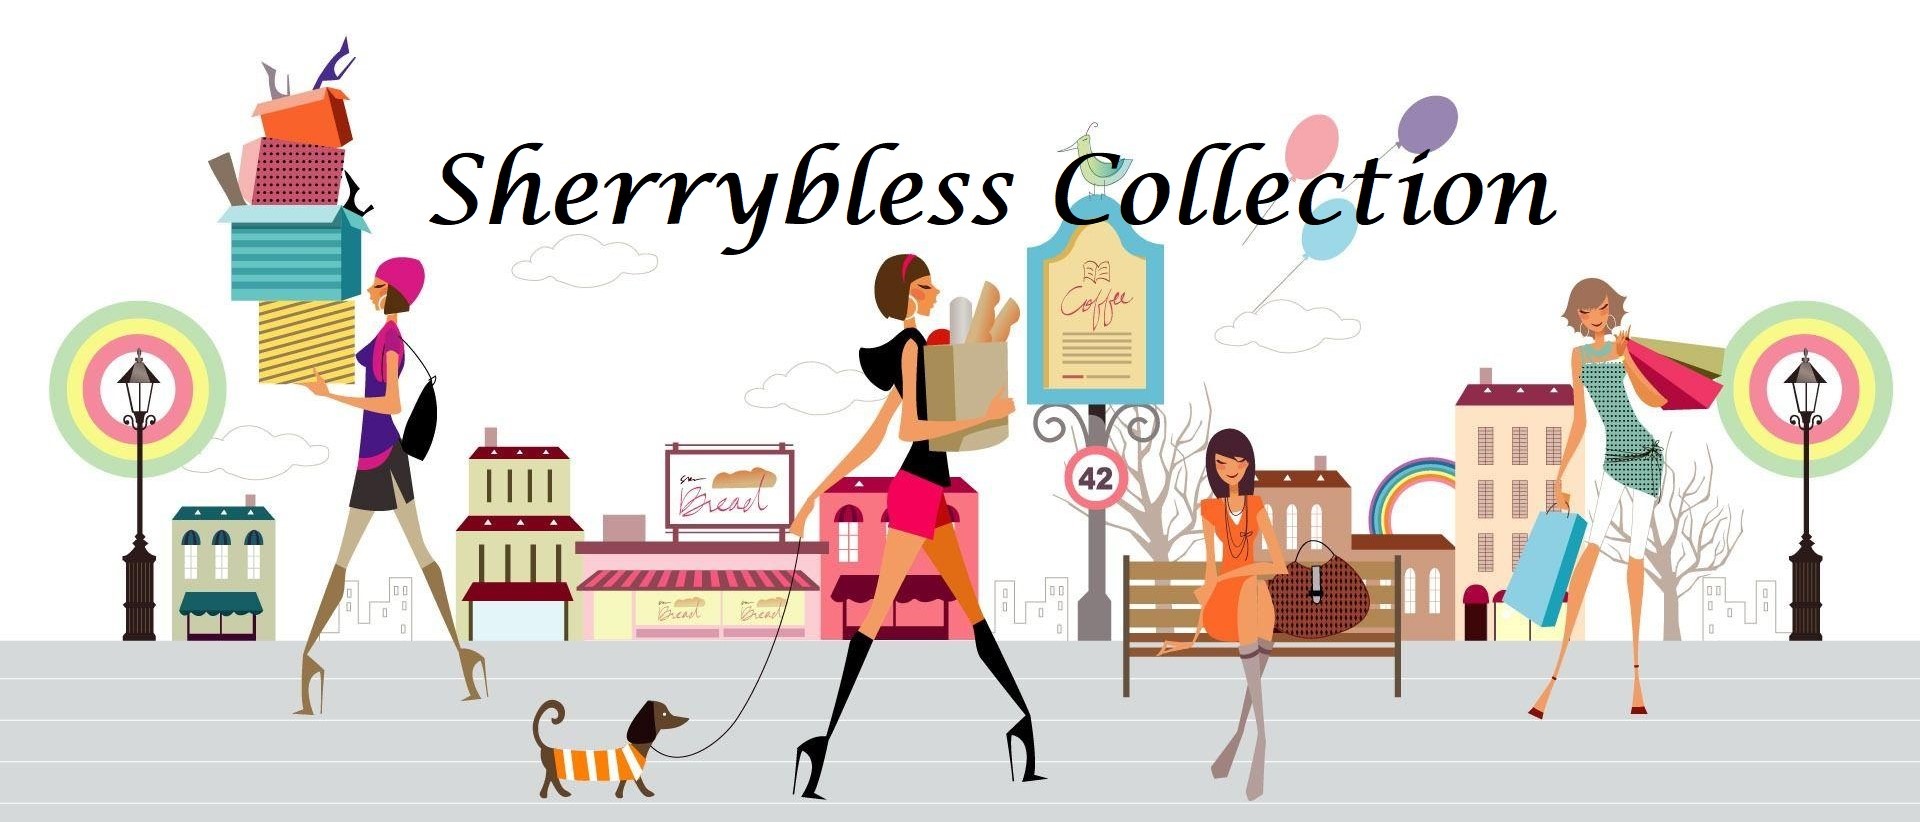 Sherrybless Collection購物平台